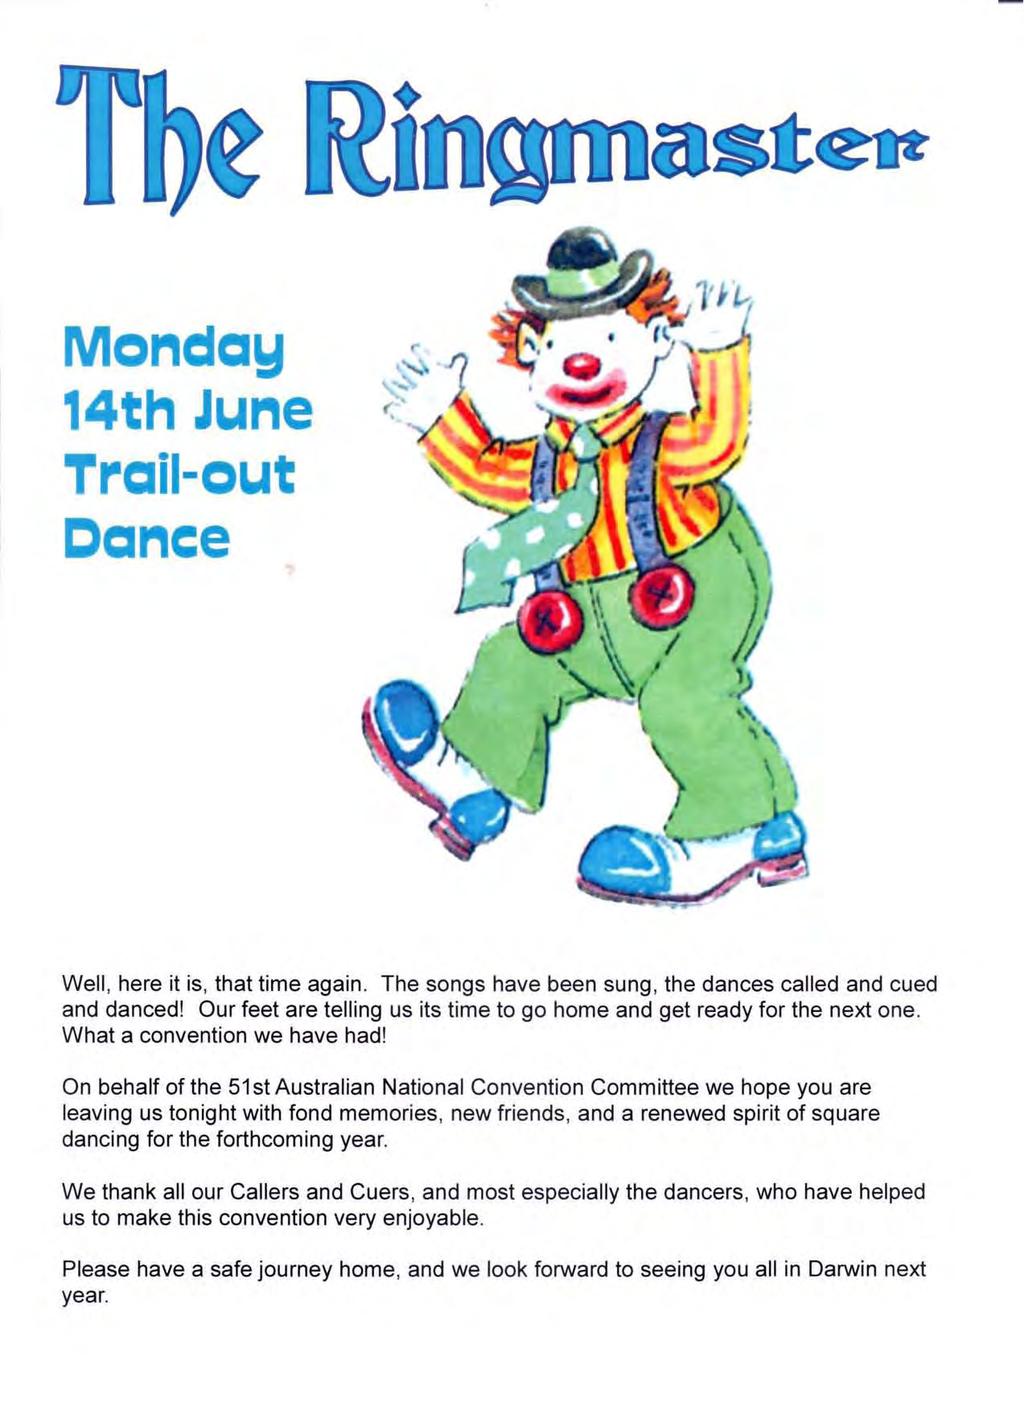 Mondaw 14th June Trail-out Dance Well, here it is, that time again. The songs have been sung, the dances called and cued and danced!